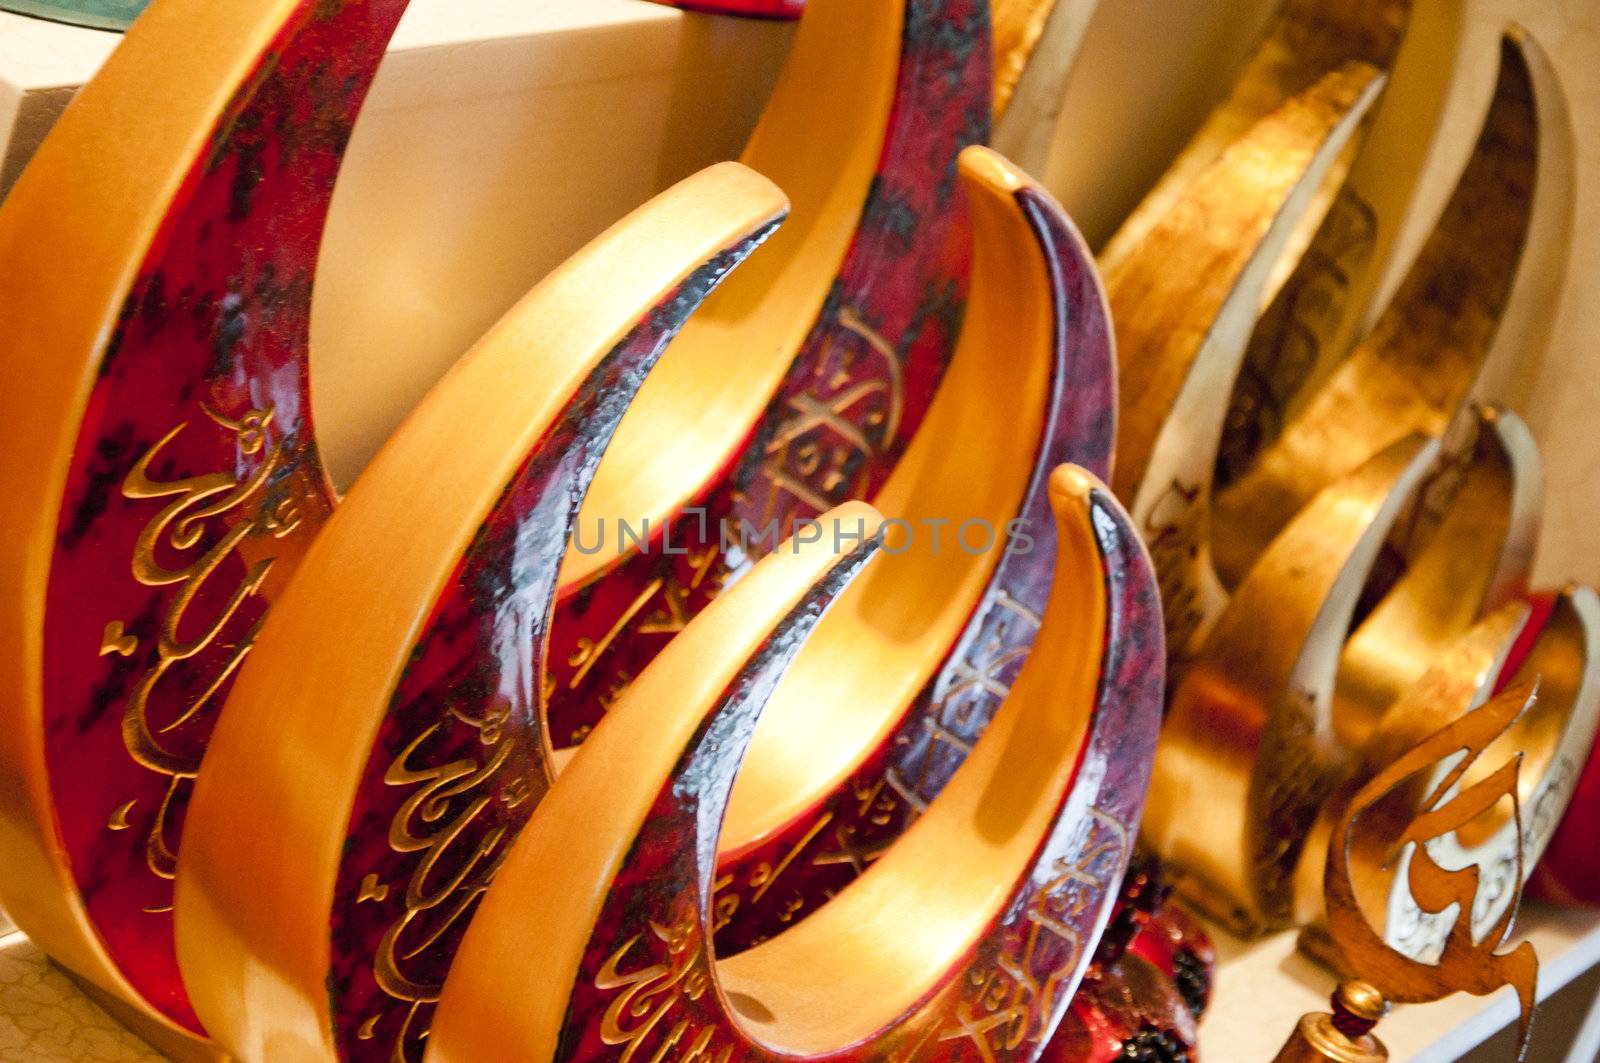 Details from very cool and decorative Turkish souvenirs, traditional designs